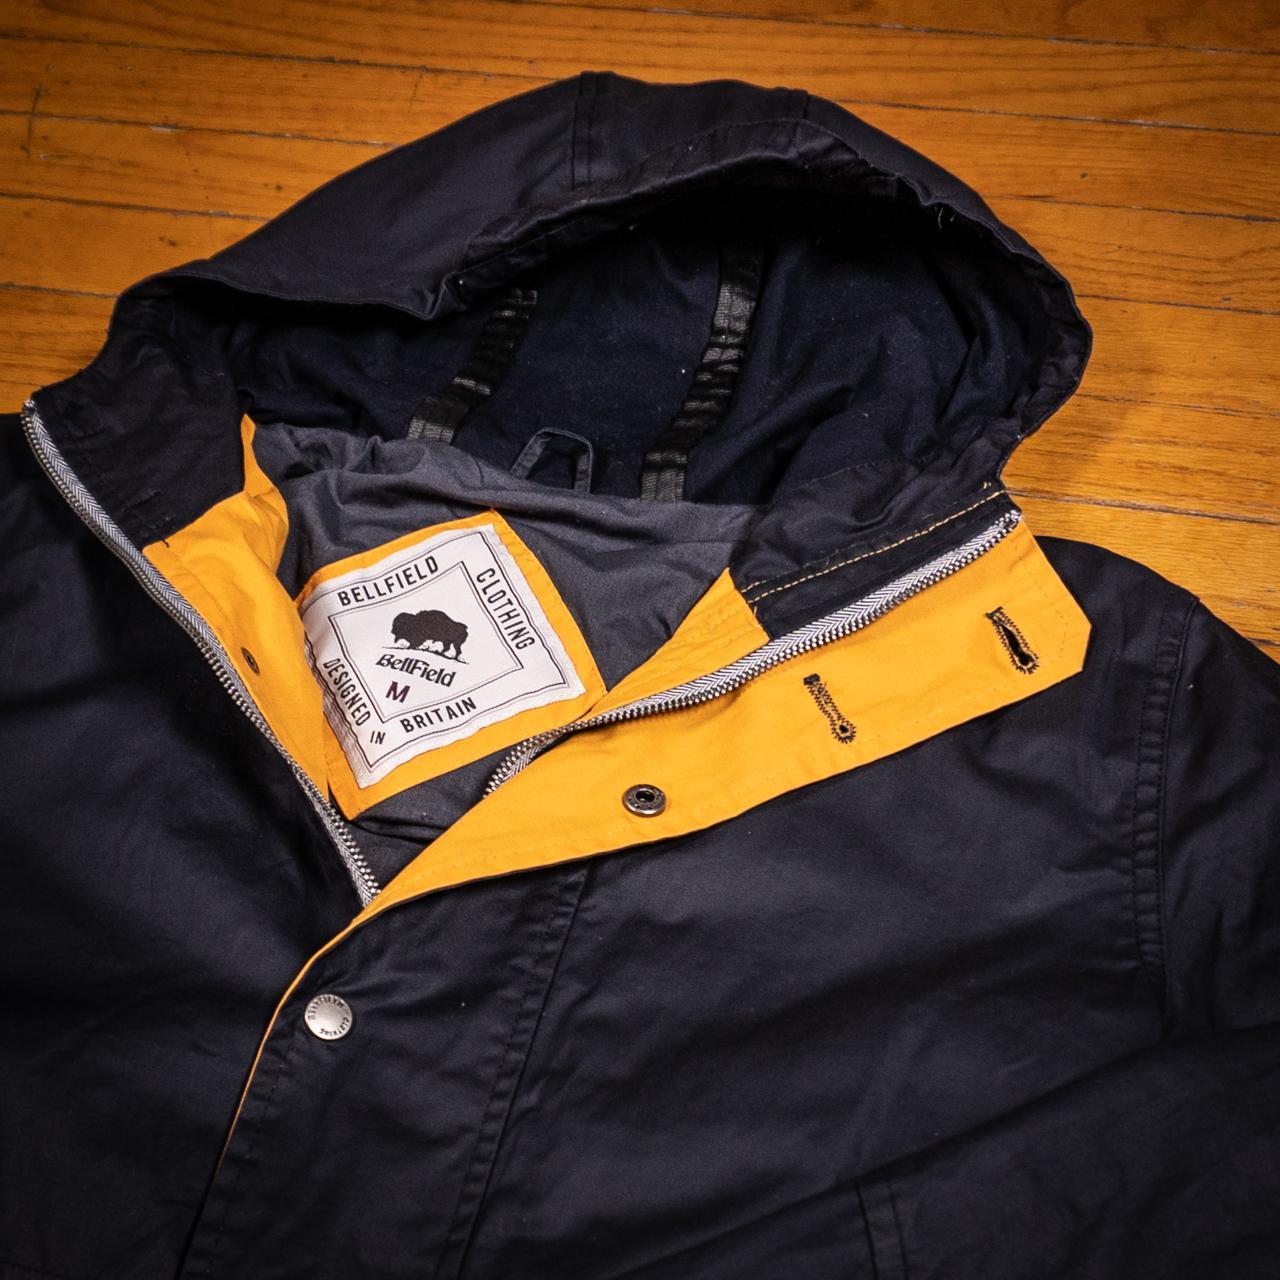 Product Image 2 - • Awesome Bellfield Clothing parka
•